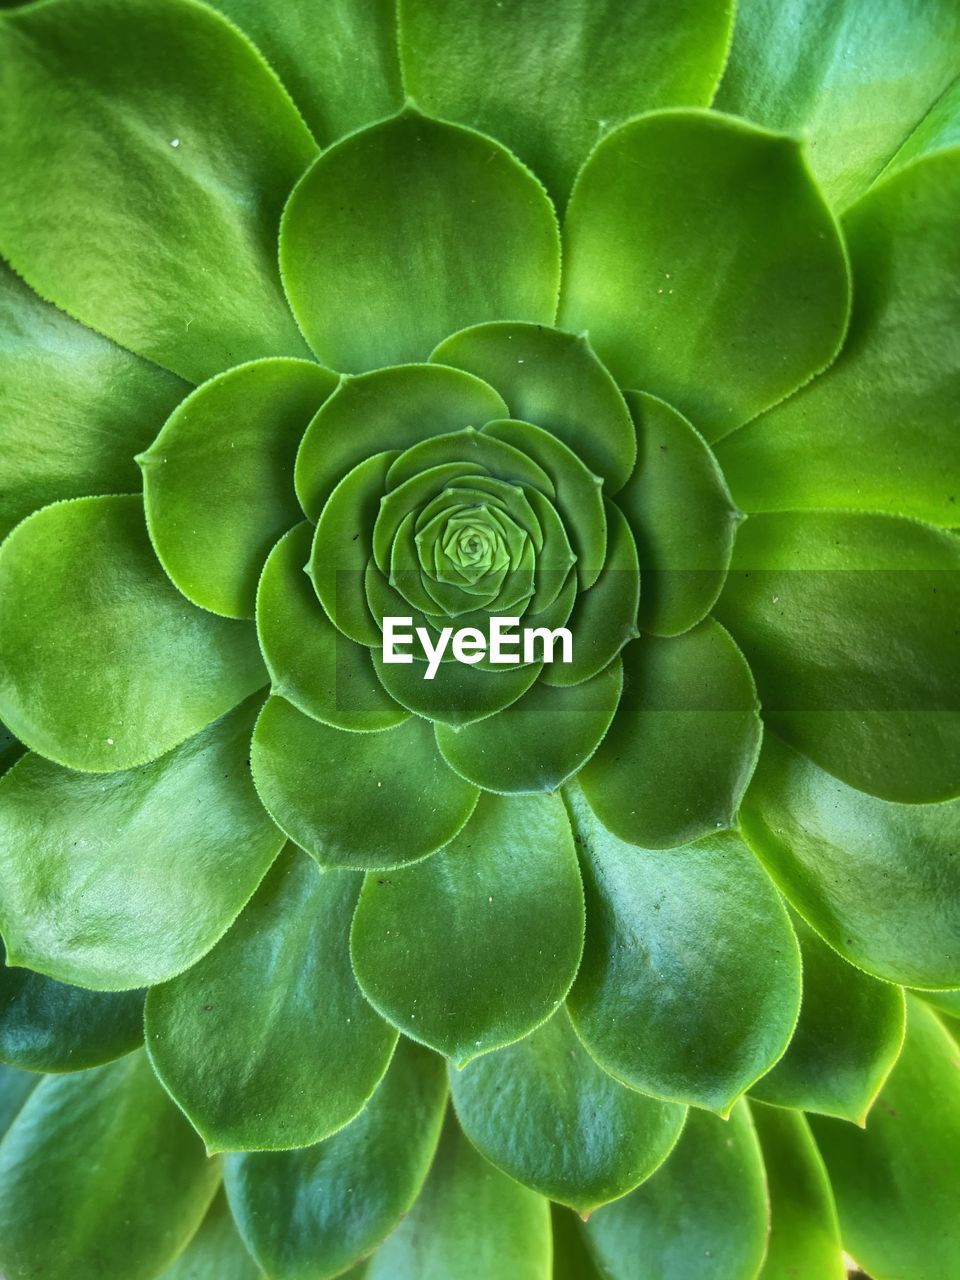 green, plant, plant part, leaf, growth, beauty in nature, full frame, nature, flower, no people, backgrounds, close-up, succulent plant, pattern, freshness, botany, outdoors, petal, vegetable, day, macro, spiral, extreme close-up